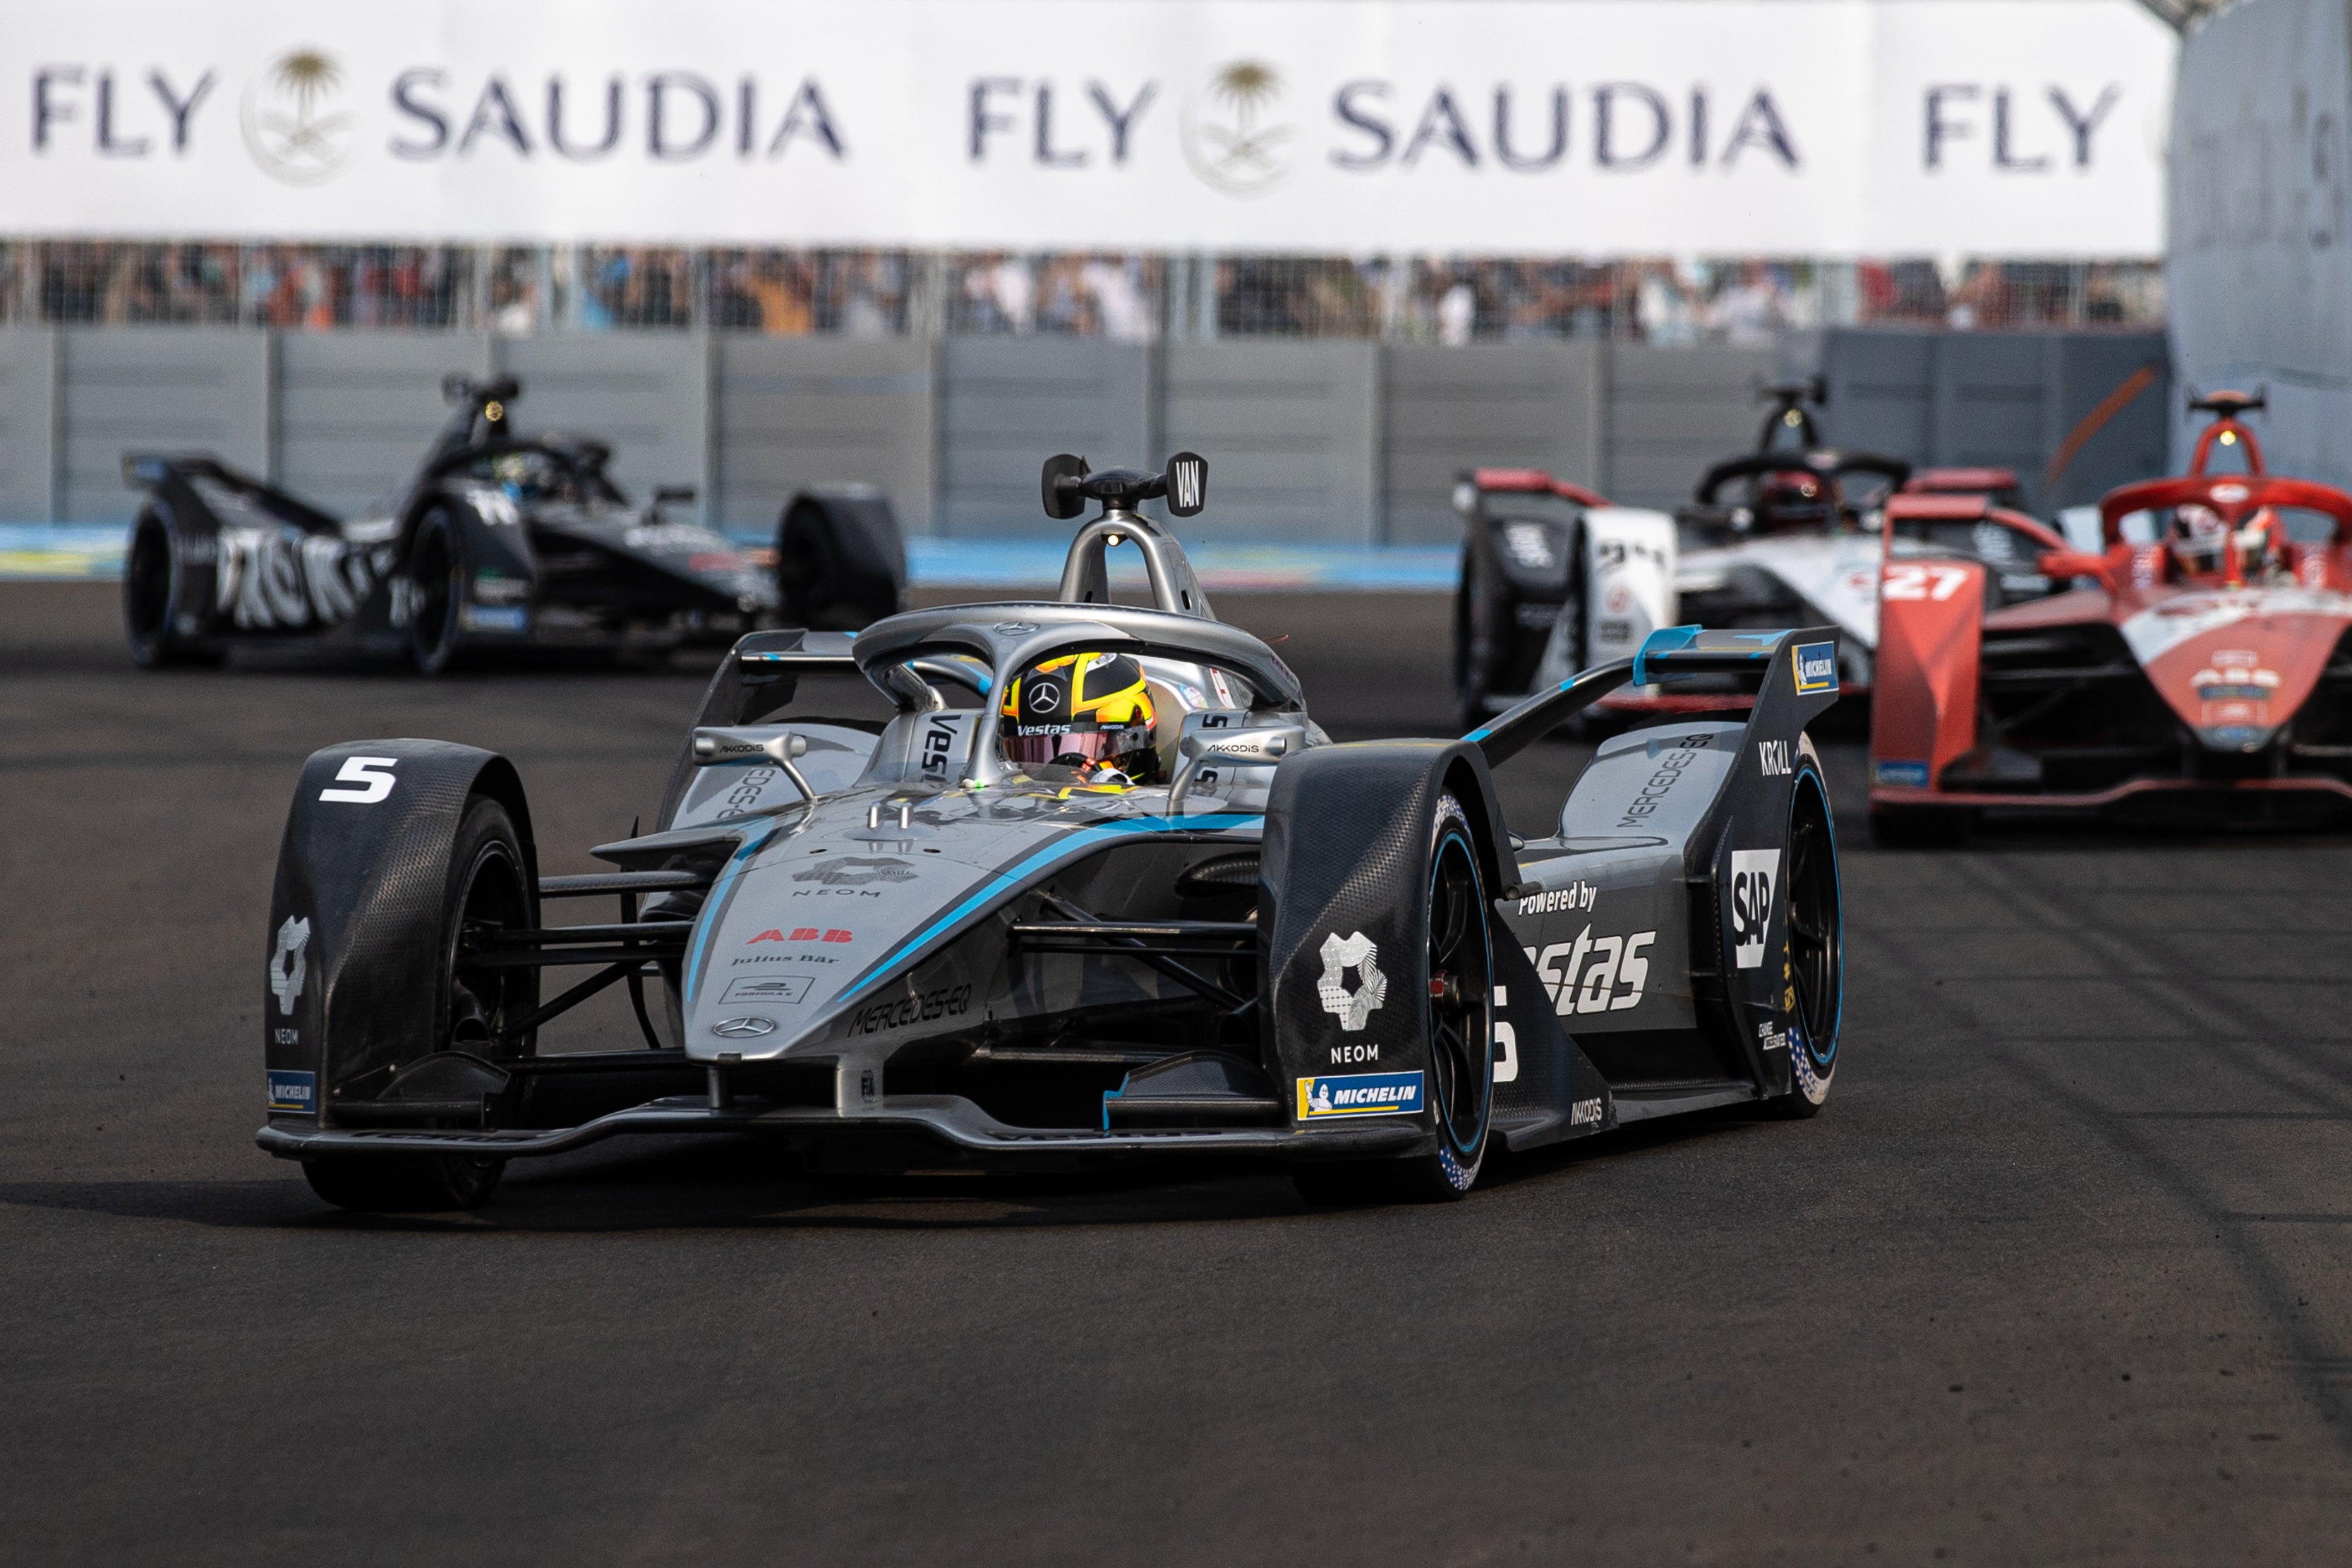 Mercedes-EQ driver Vandoorne has a 36-point lead at the top of the Formula E standings with two races to go